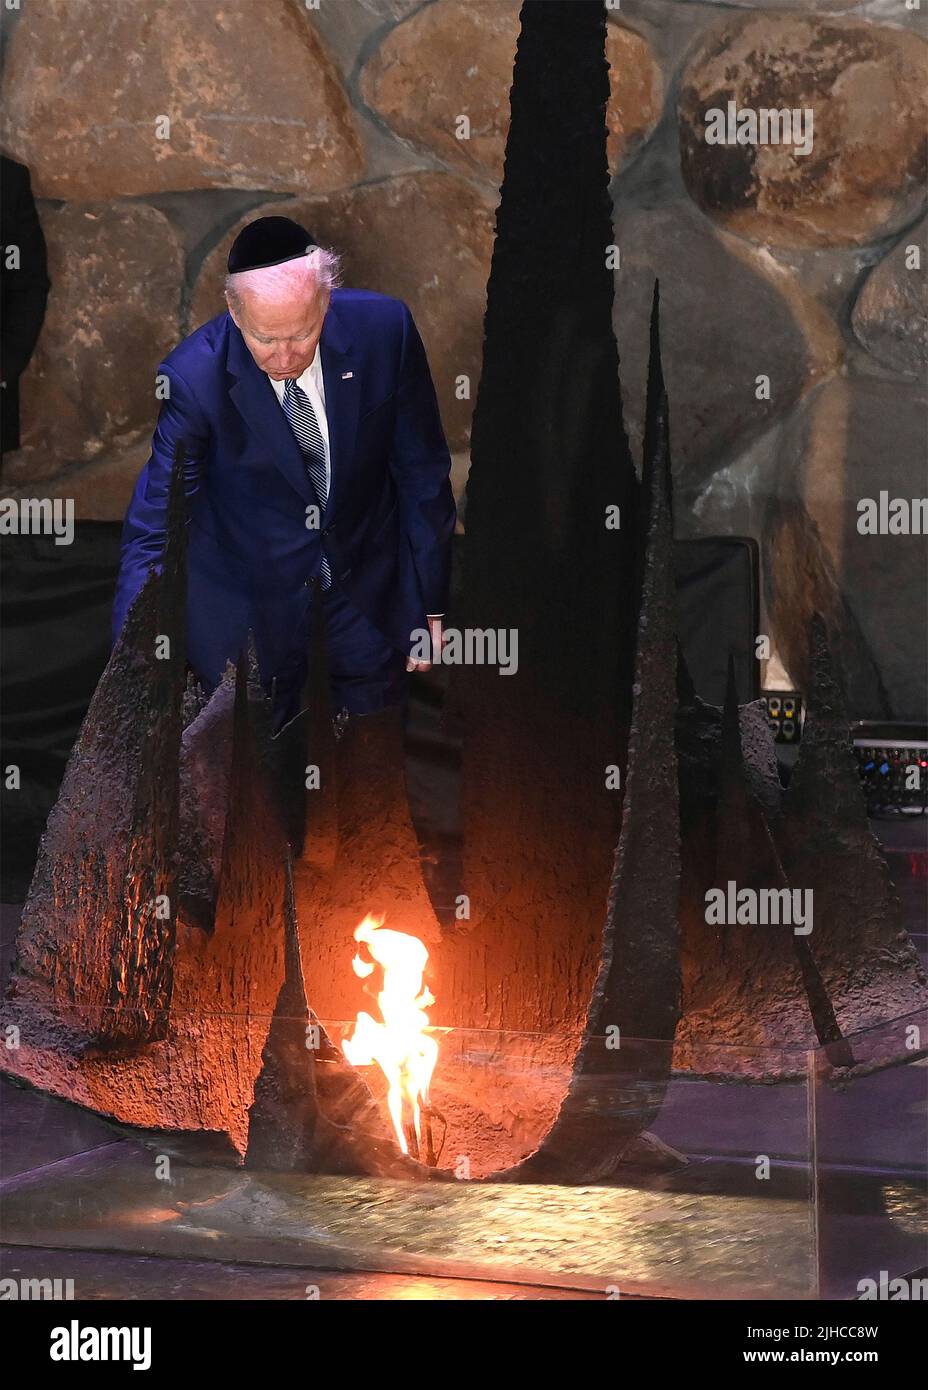 Jerusalem, Israel. 13 July, 2022. U.S President Joe Biden, pauses at the Eternal Flame during a visit to the Hall of Remembrance of the Yad Vashem Holocaust Memorial Museum, July 13, 2022 in Jerusalem, Israel. Stock Photo